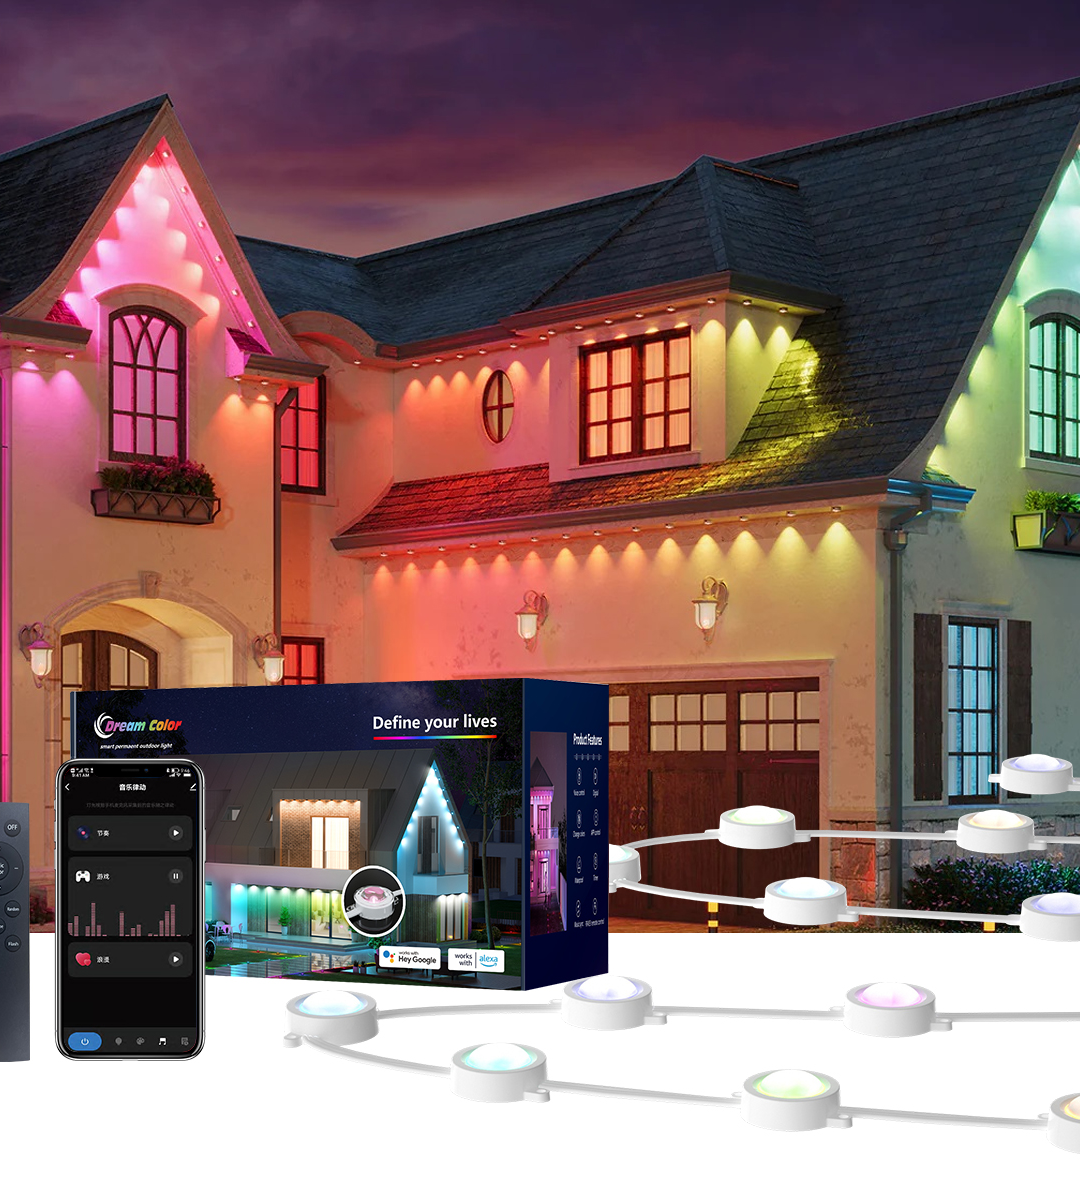 CL LIGHTING's Energy-Efficient Holiday Lights: Sustainable Celebrations for Retailers